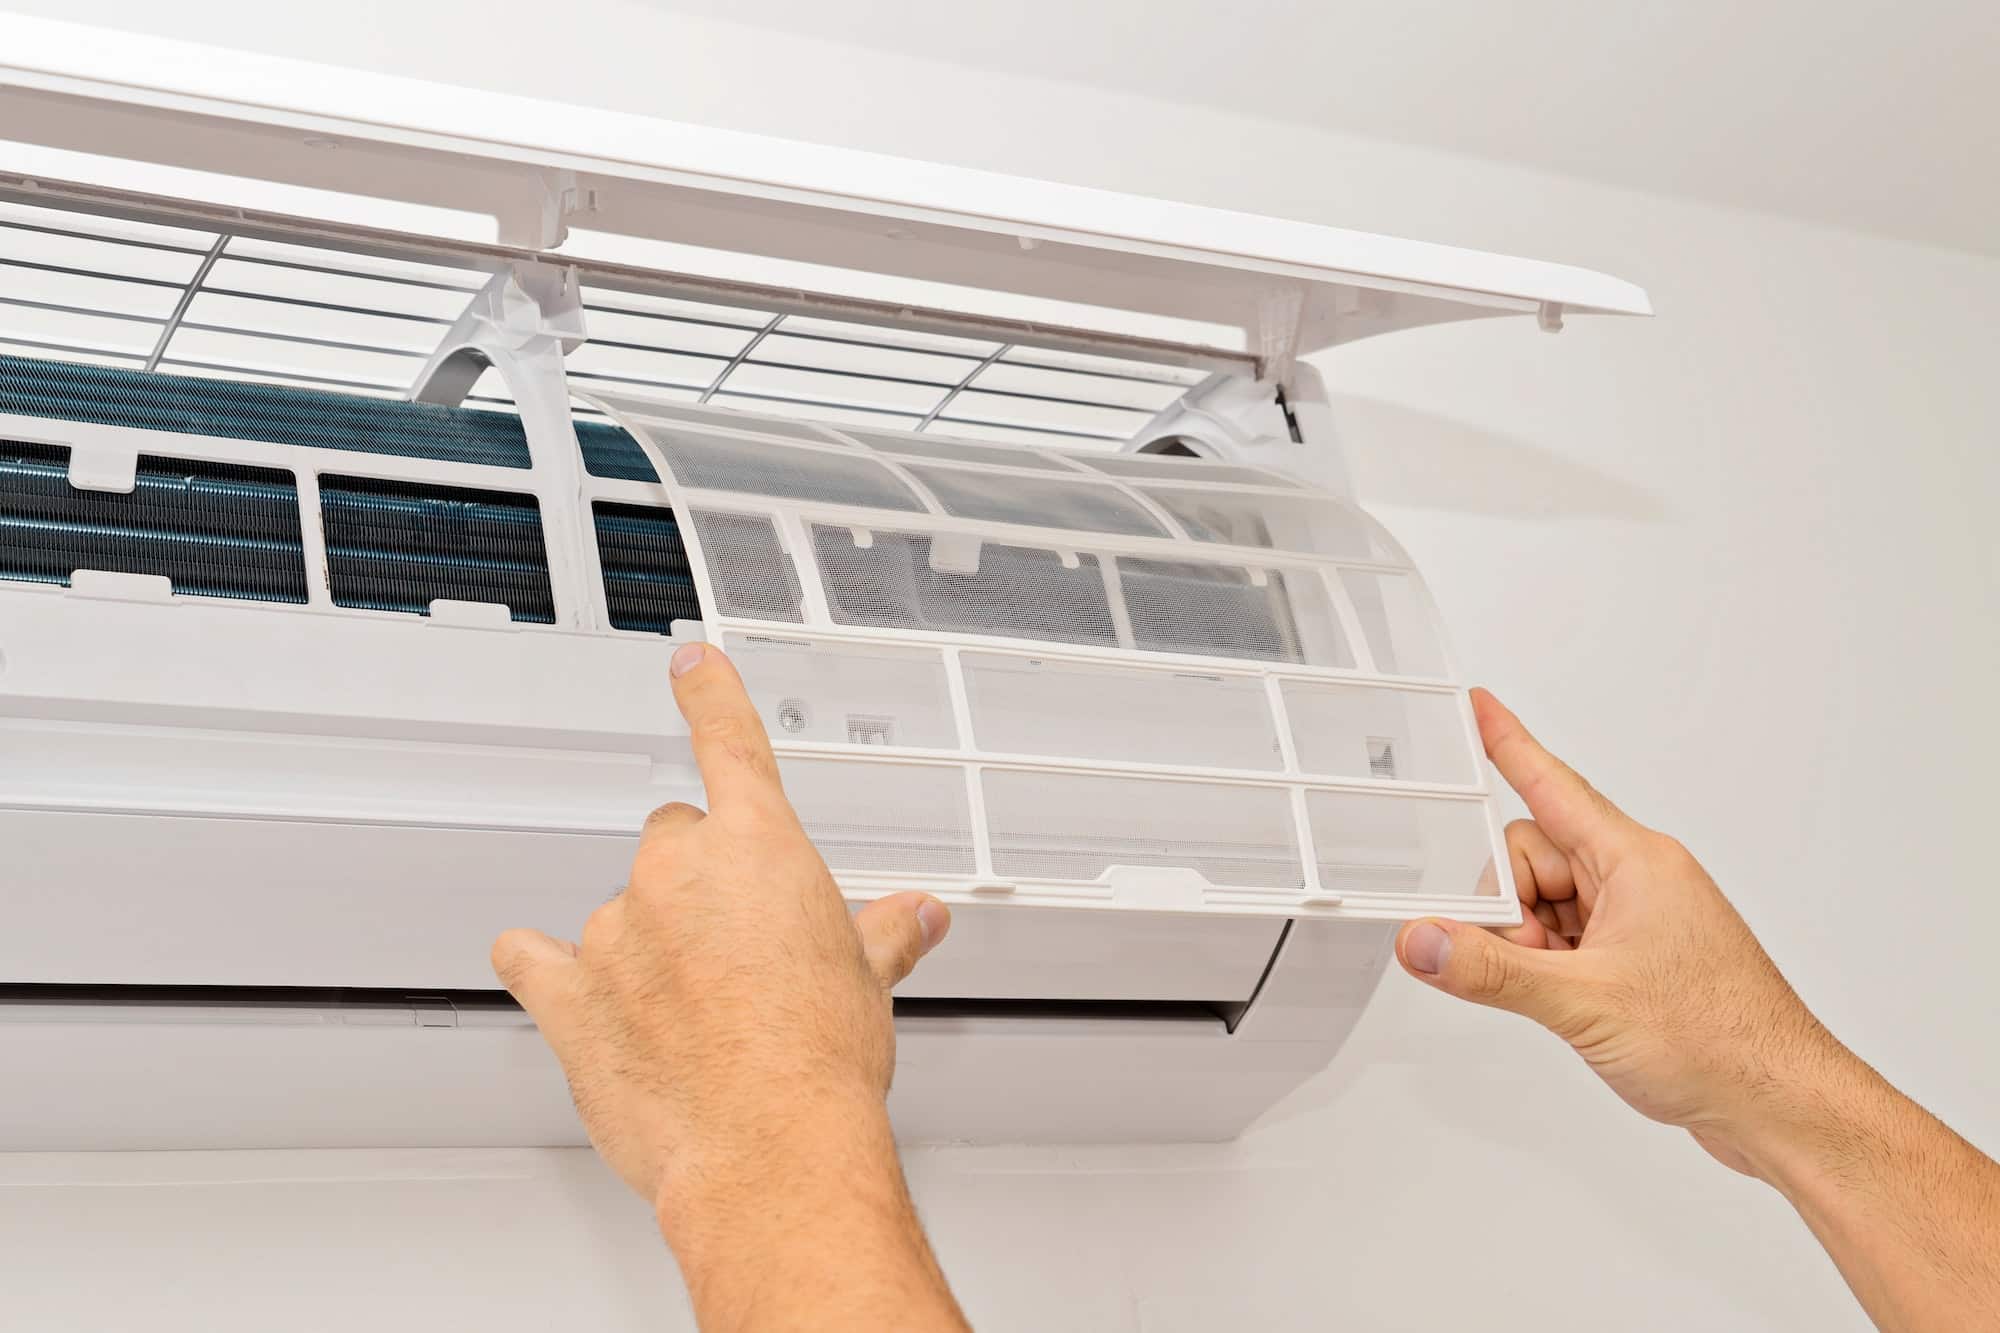 Replacing your AC filter is a simple process that can help you save money on your energy bills and improve air quality in your home.